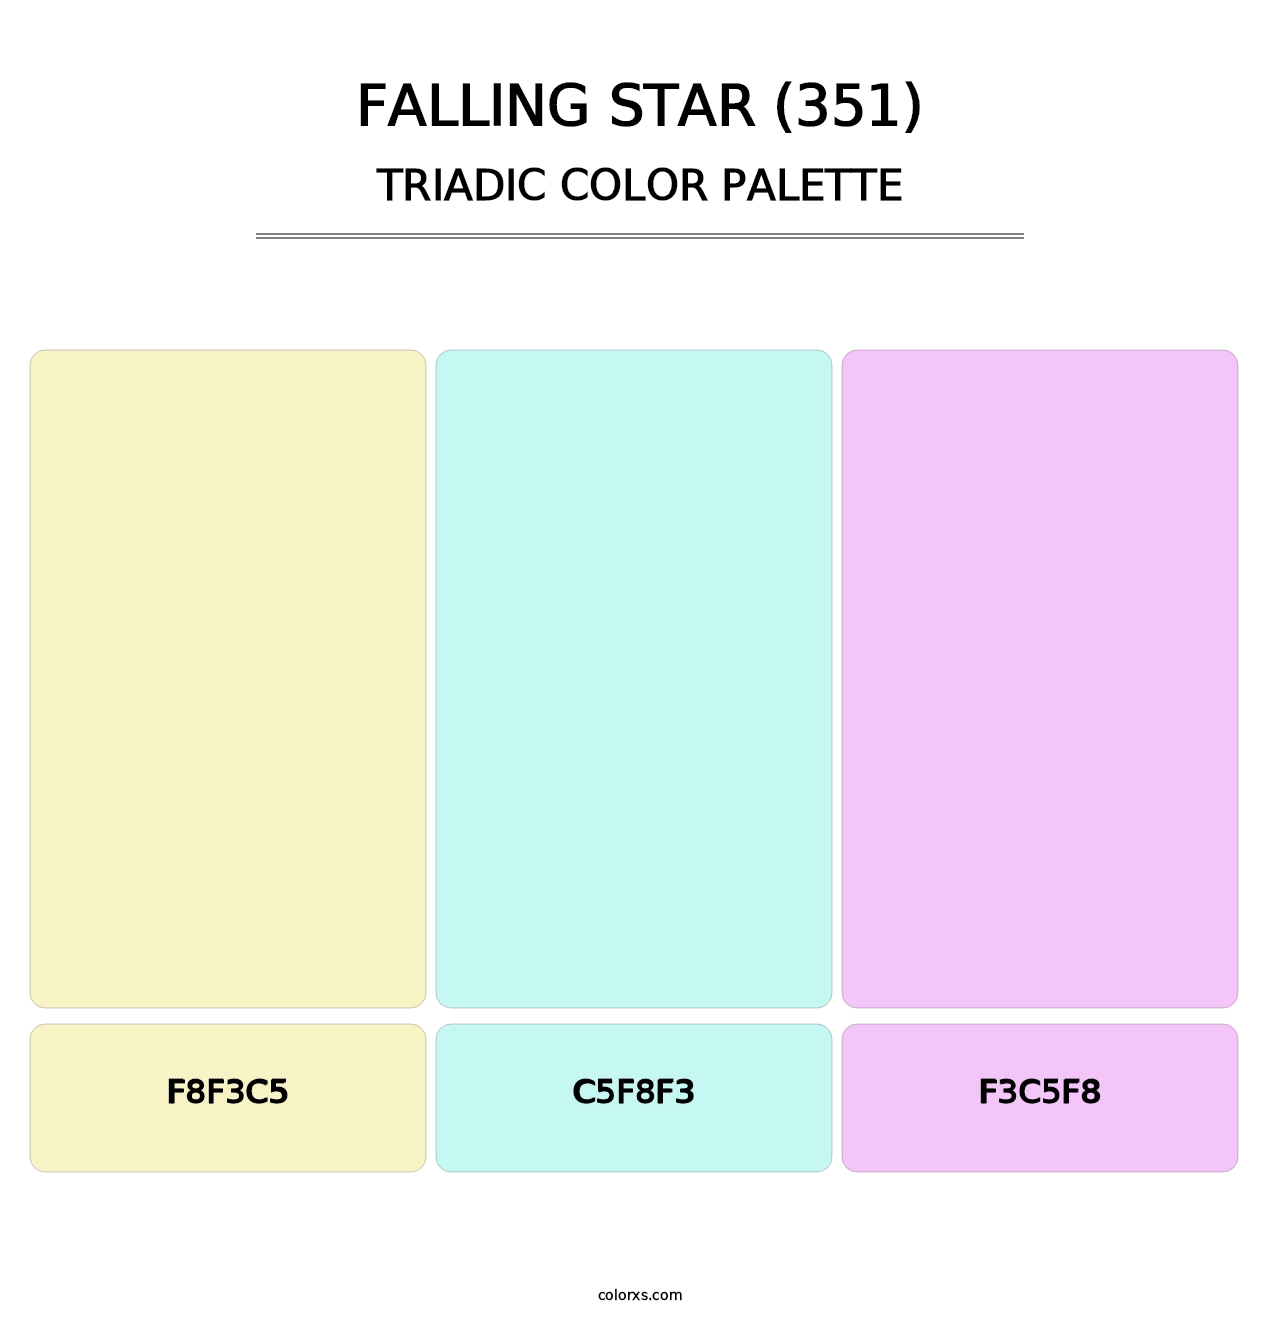 Falling Star (351) - Triadic Color Palette